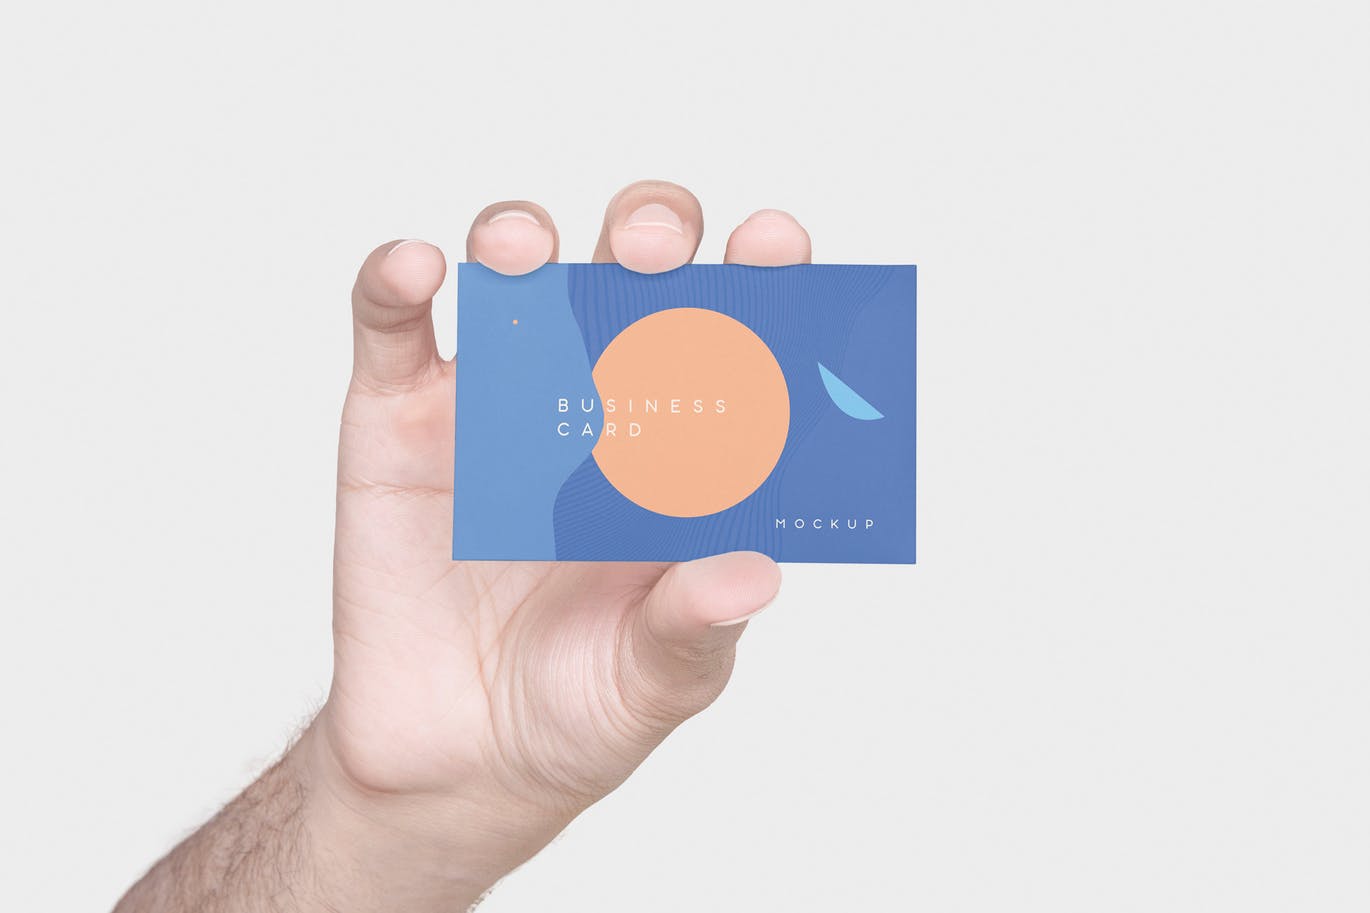 Man hand holding business card